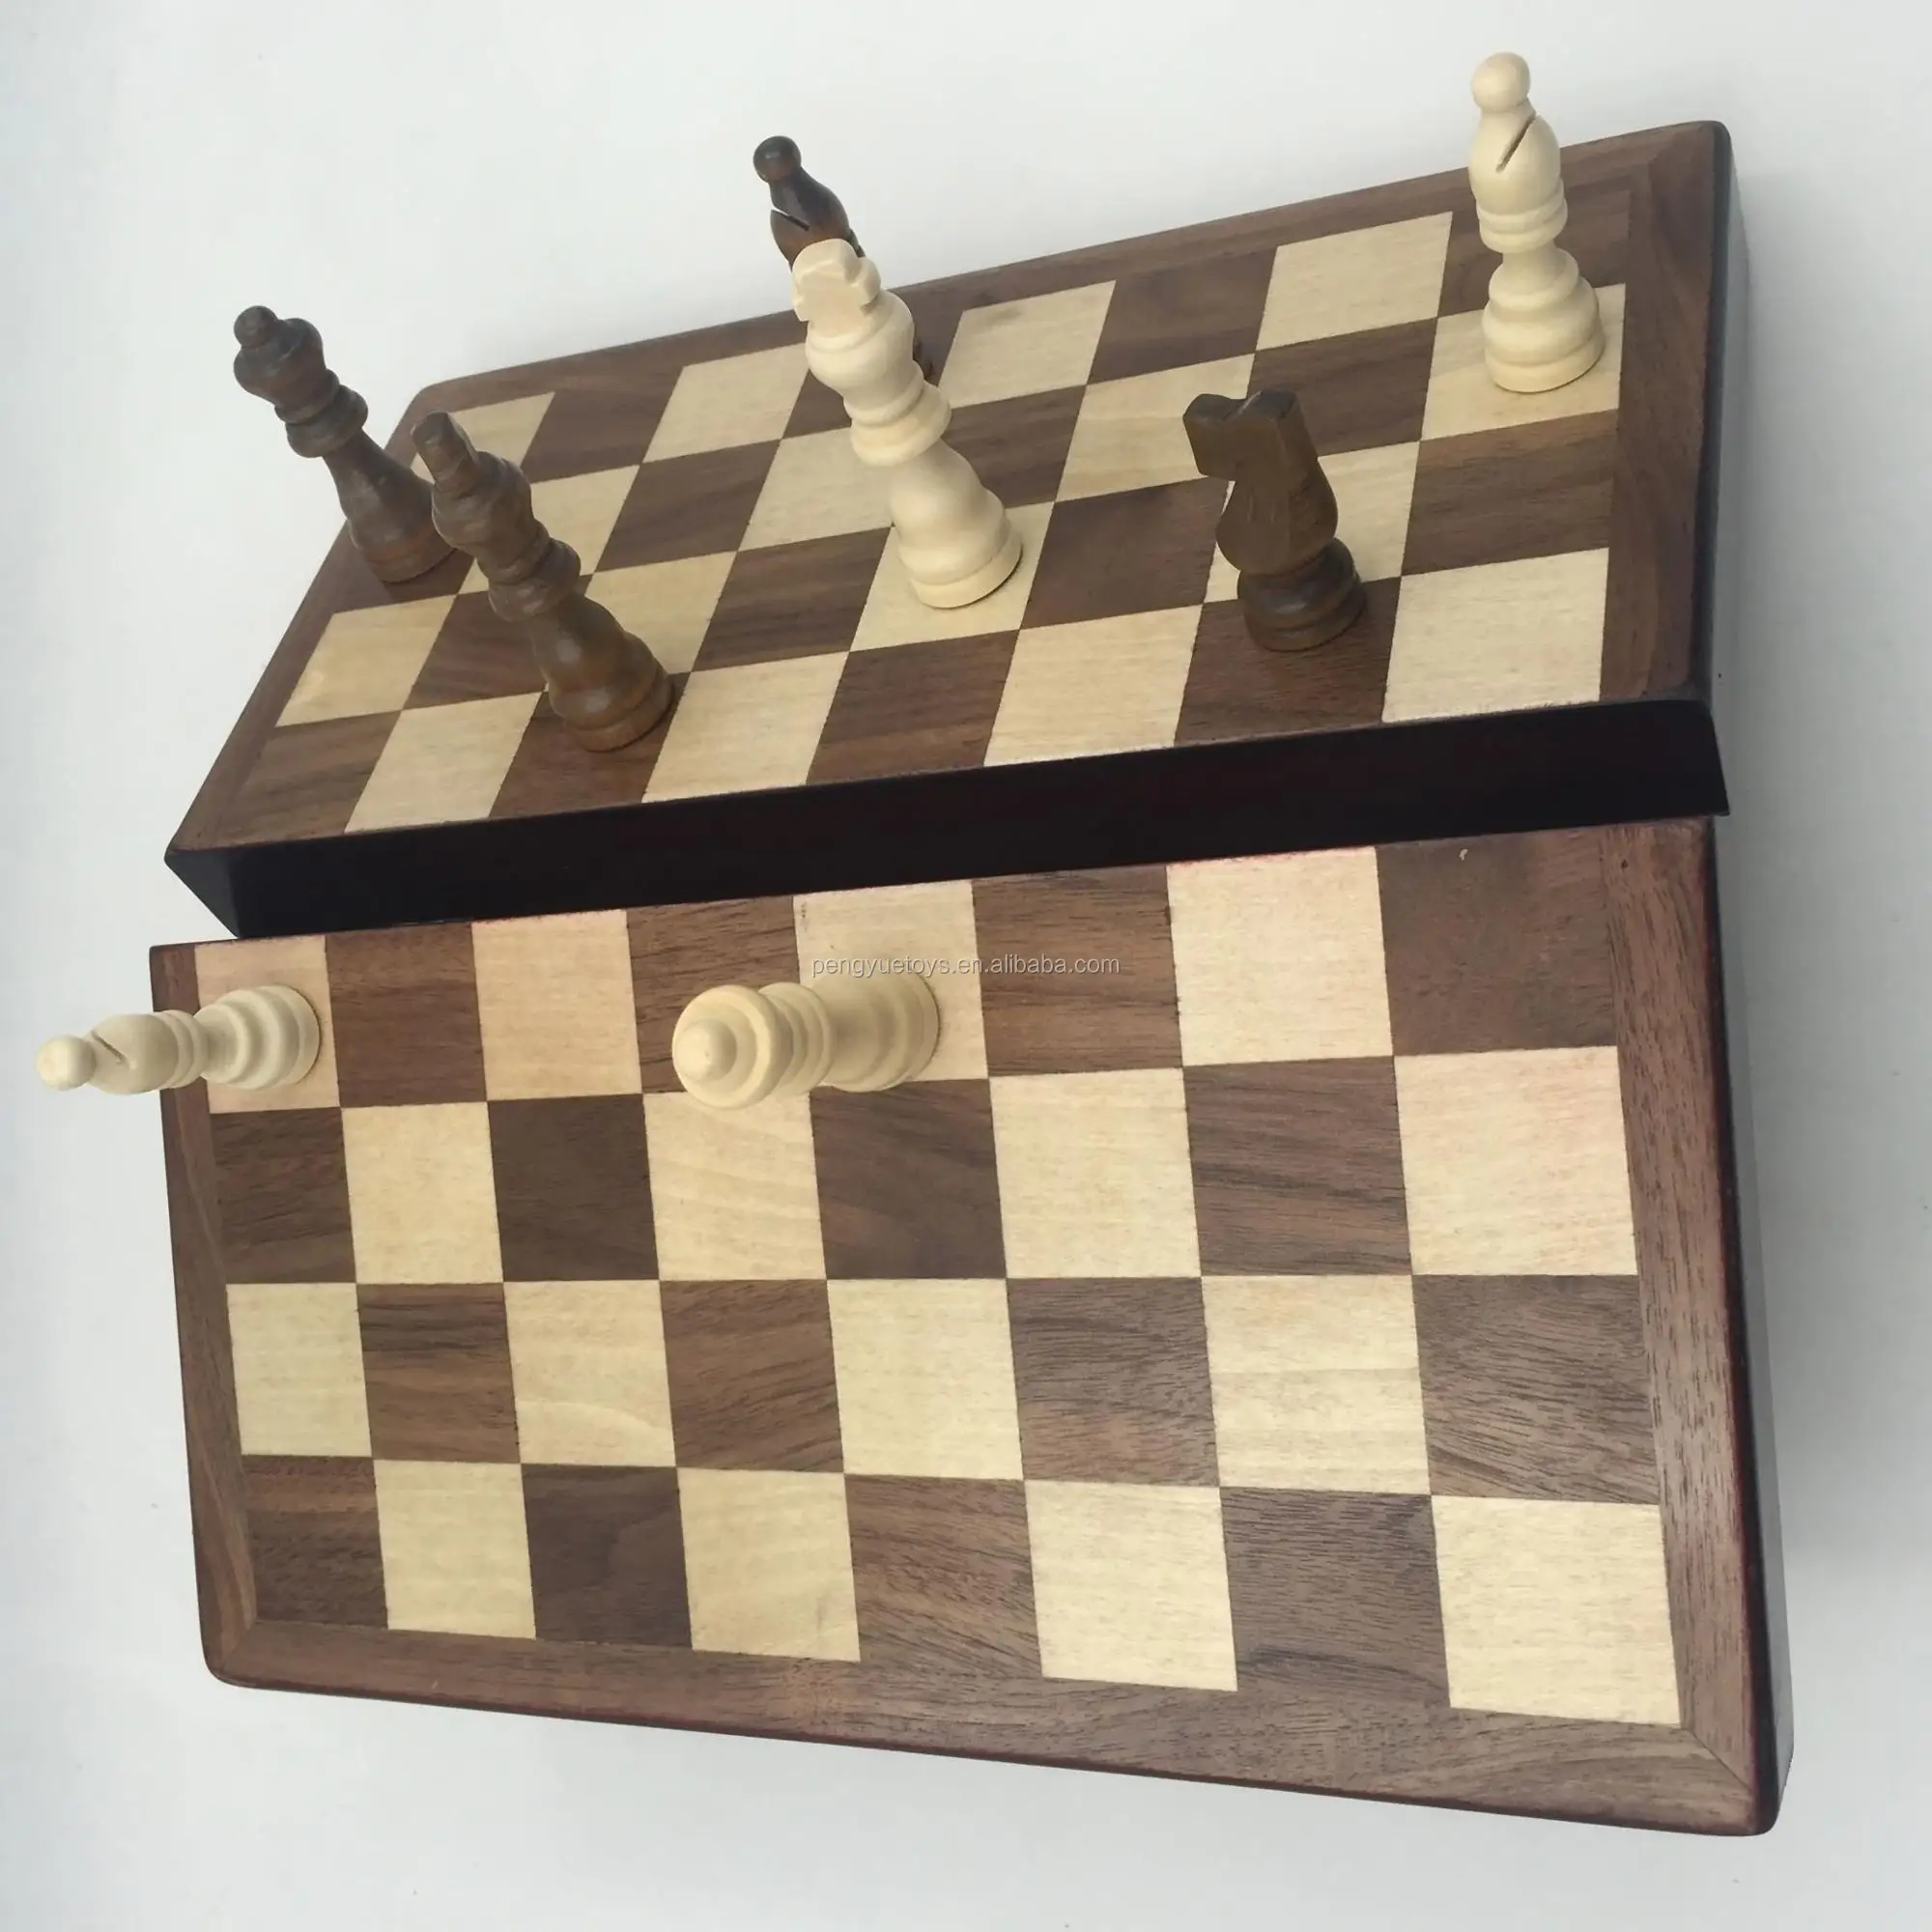 Classic Wooden Magnetic Chess Game Shure Products Inc 5141 